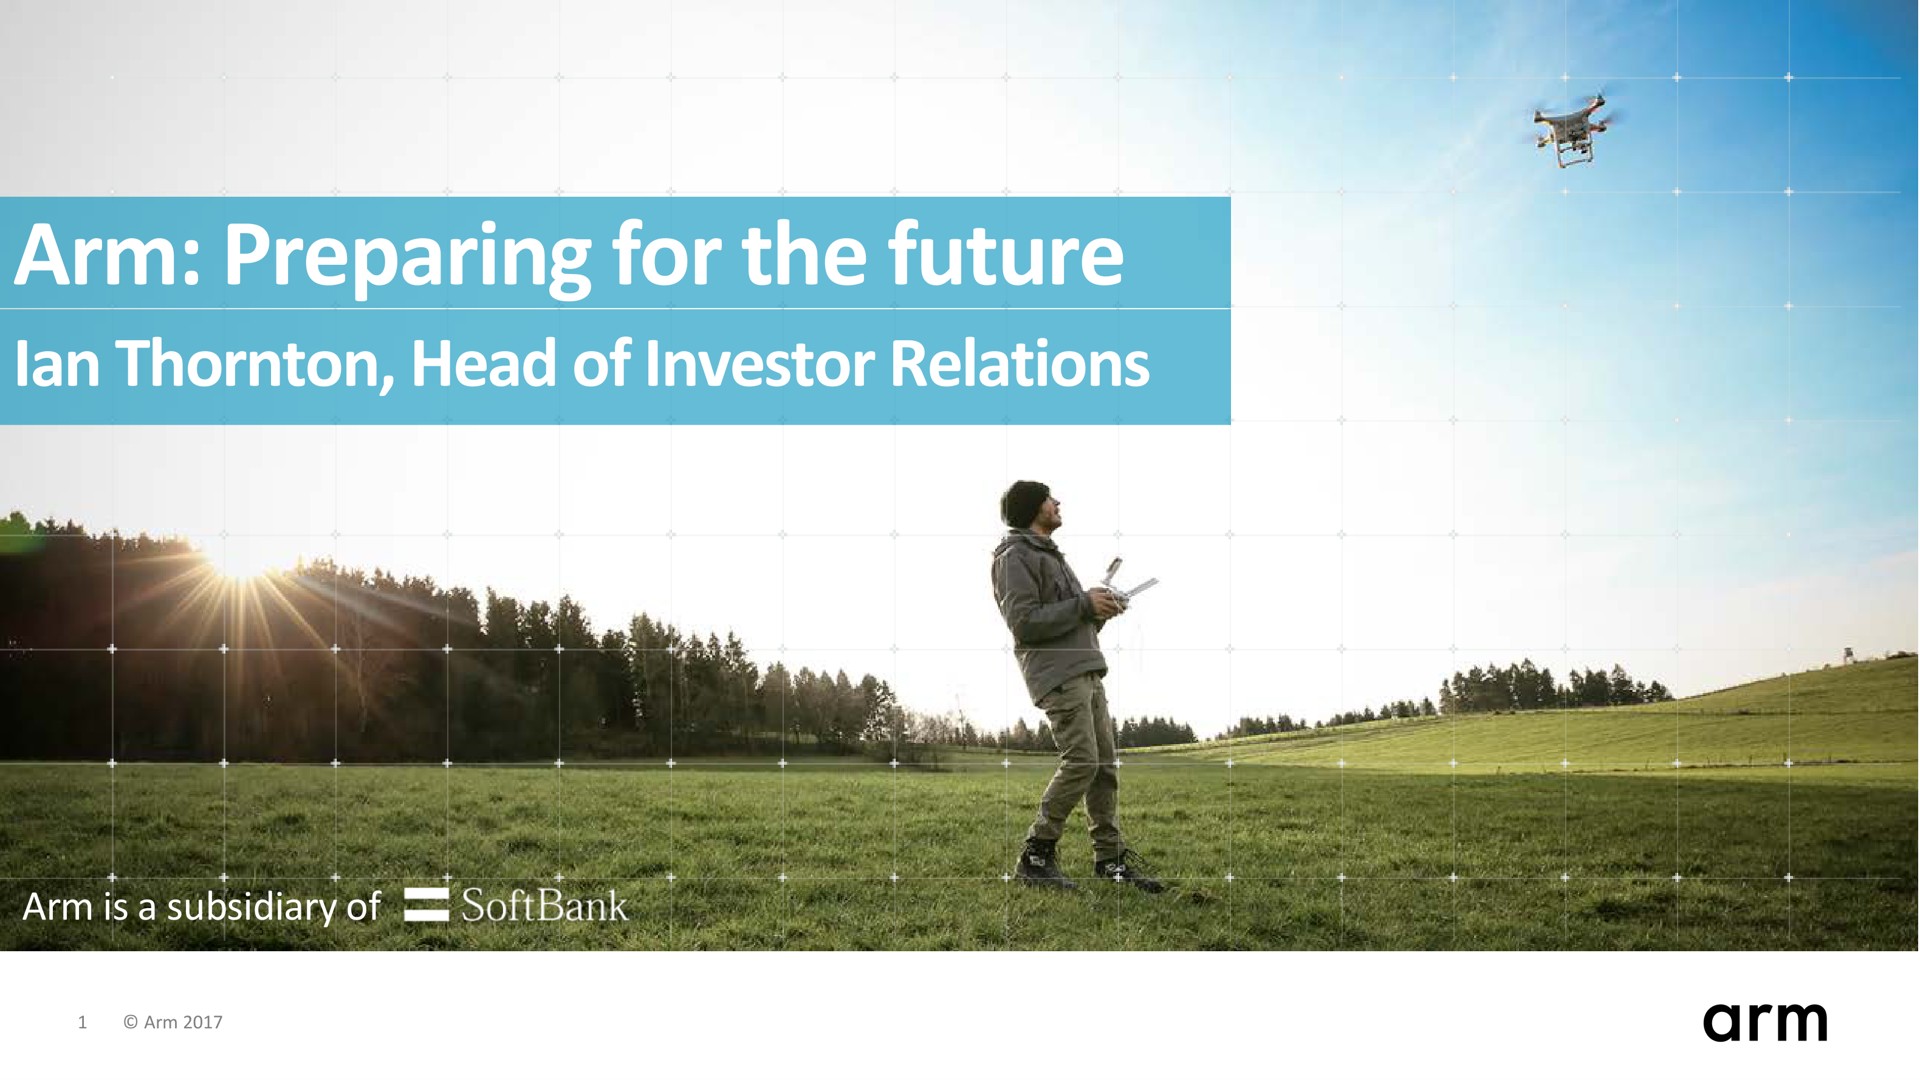 arm preparing for the future head of investor relations an gash an dal lan | SoftBank